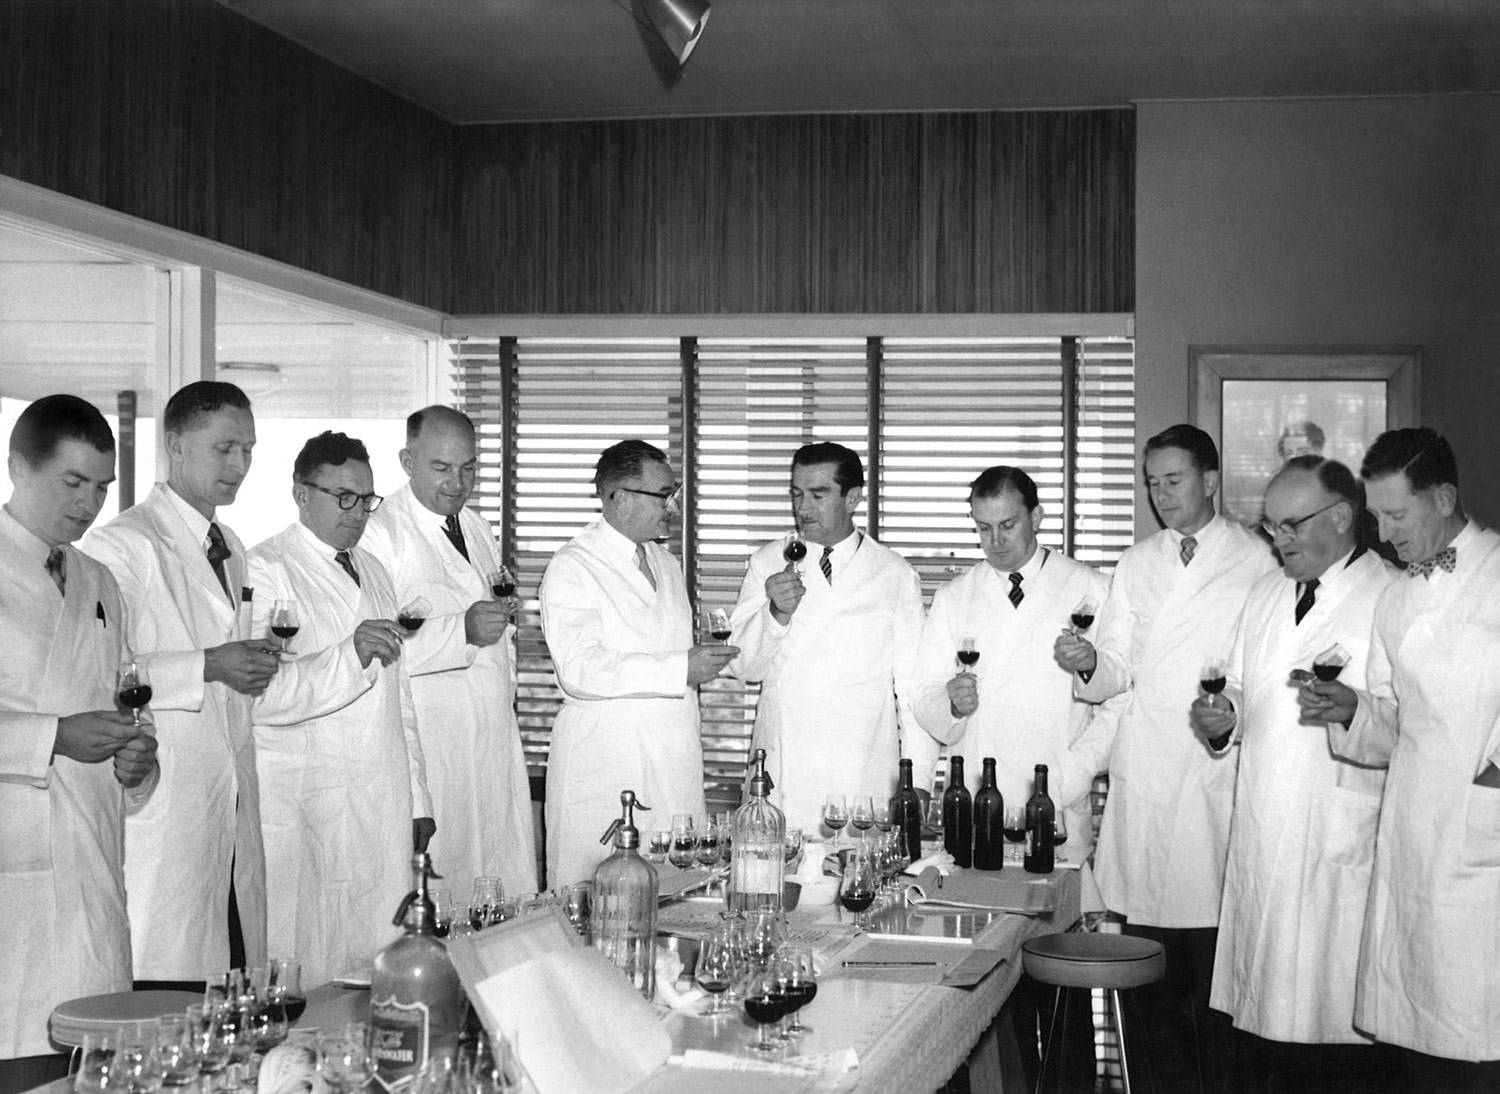 The Penfolds winemaking team in 1950 | 2023